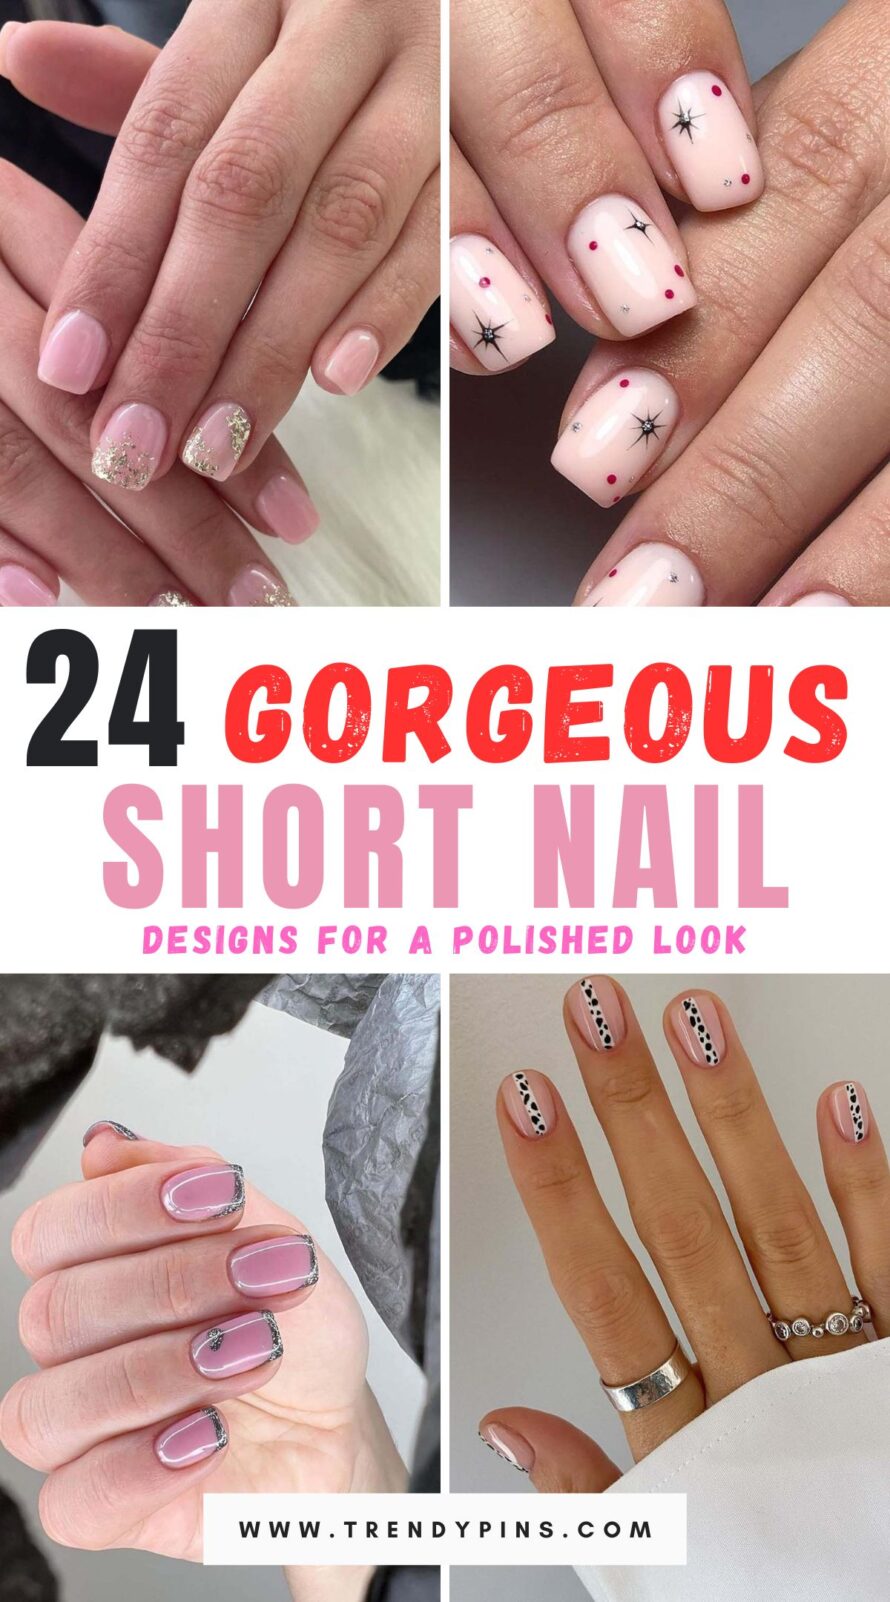 Explore 24 elegant short nail designs for a polished and sophisticated appearance. From minimalist chic to intricate patterns, find inspiration to elevate your manicure game and embrace your natural nail length with style and grace.